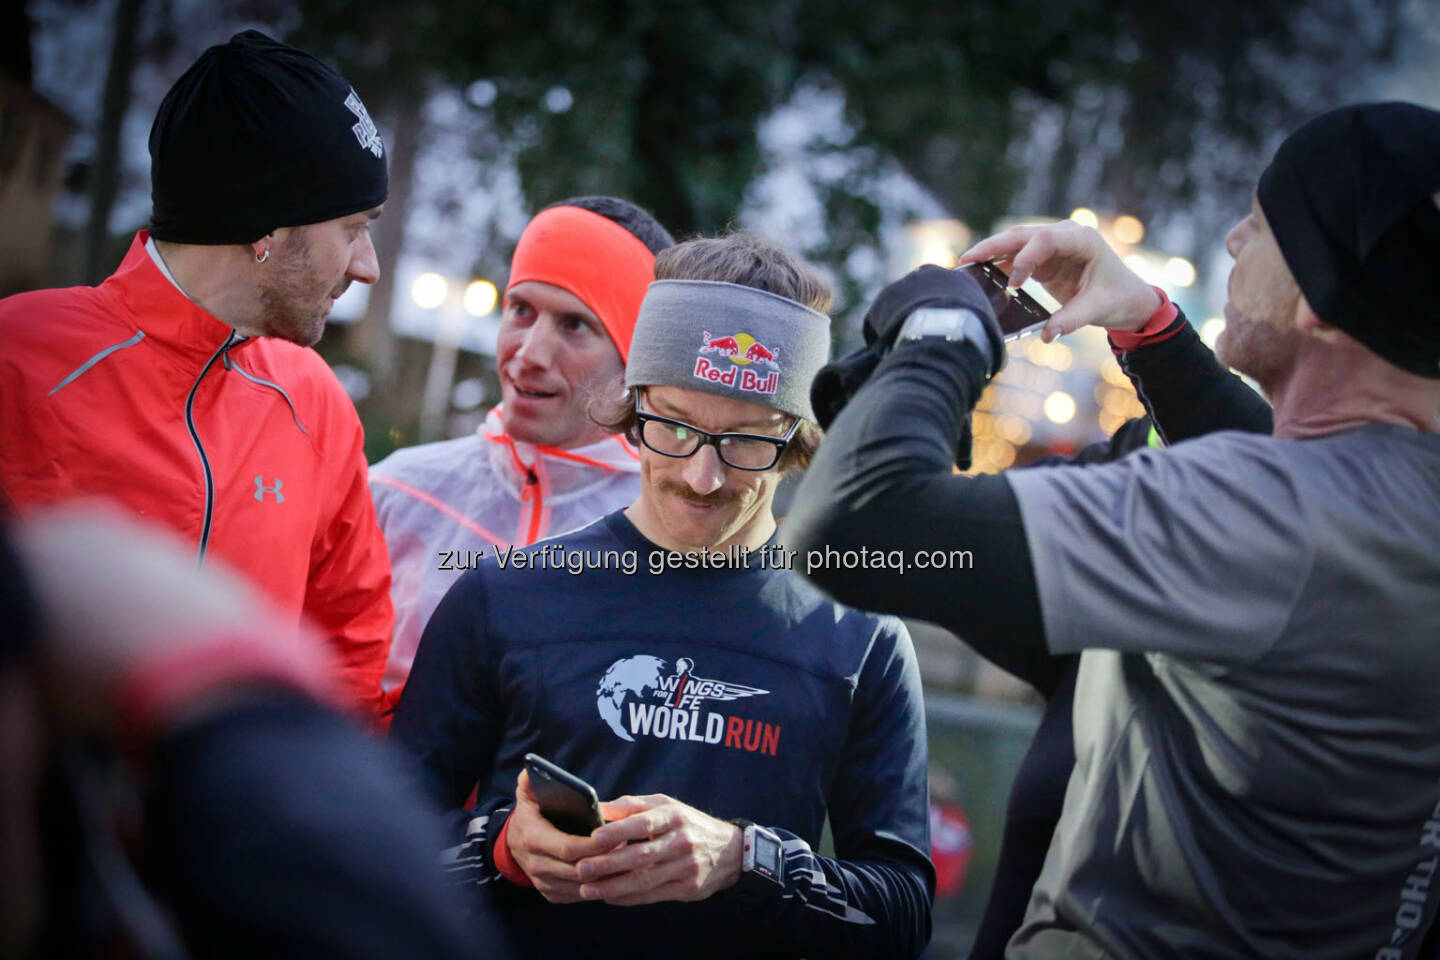 Florian Neuschwander  with participants at the Wings for Life World Run event in Munich 23rd of January 2016 (Bild: Daniel Grund)